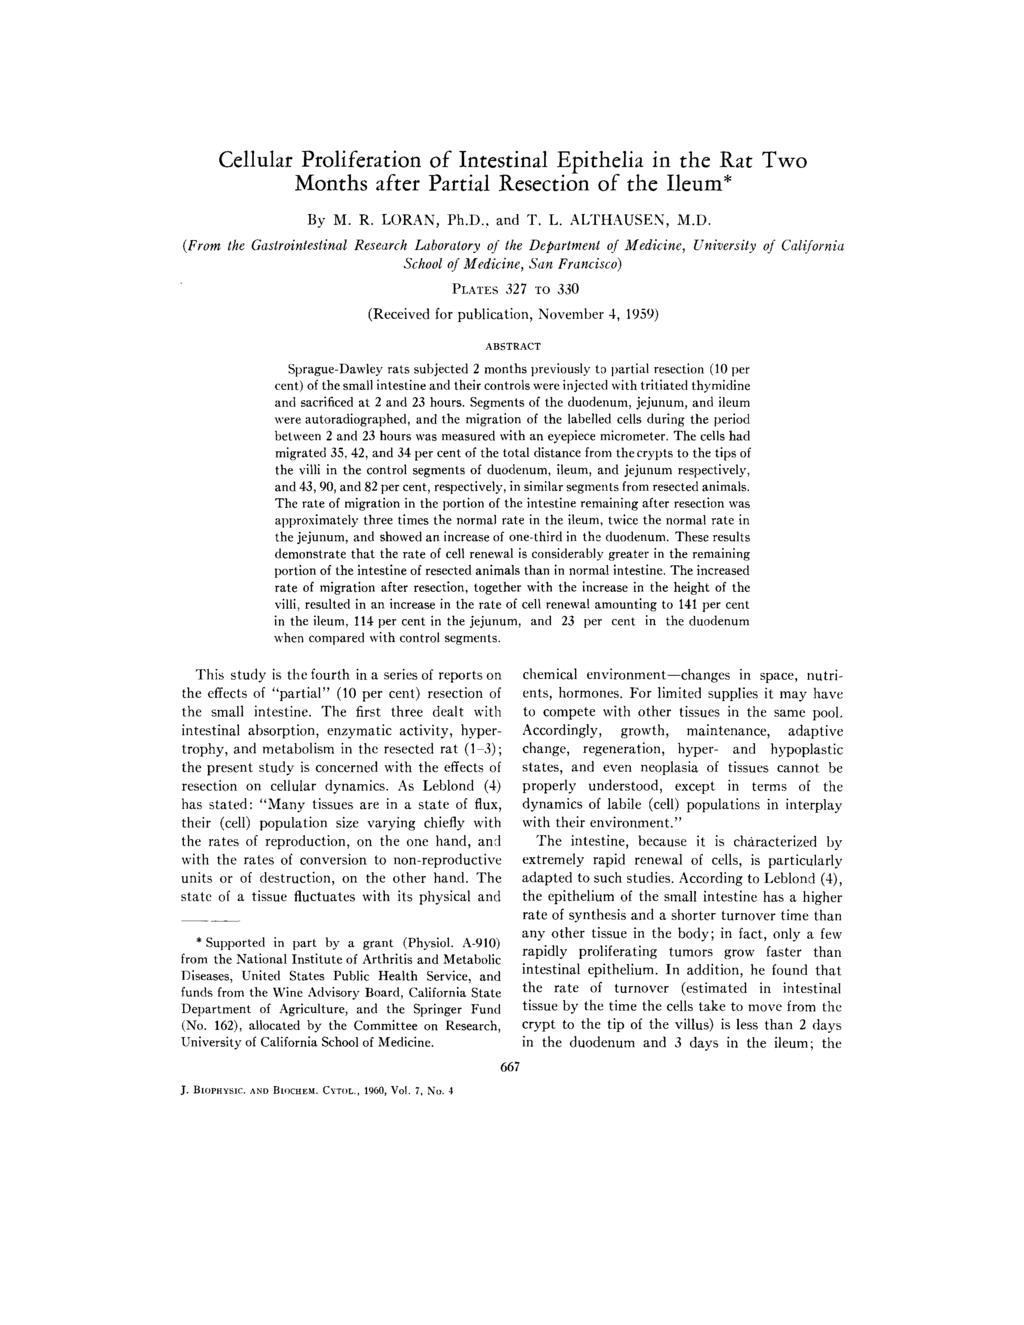 Published Online: 1 July, 1960 Supp Info: http://doi.org/10.1083/jcb.7.4.667 Downloaded from jcb.rupress.